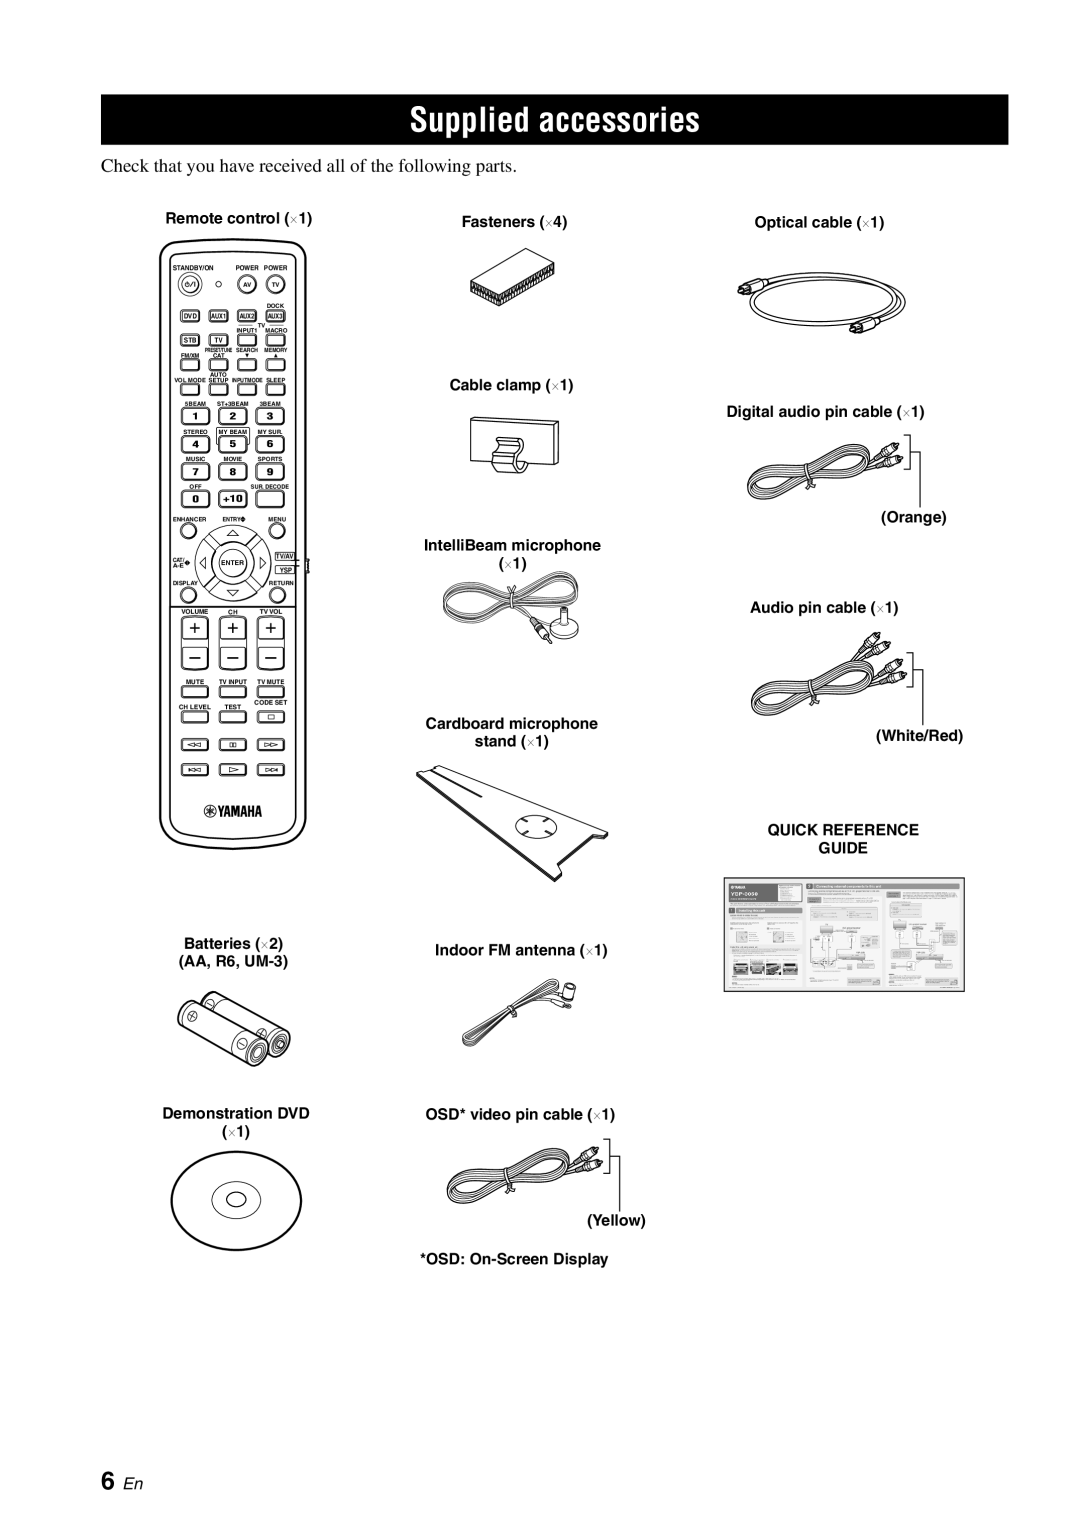 Yamaha YSP-3050 owner manual Supplied accessories, 6 En, Remote control ⋅1, Fasteners ⋅4 Cable clamp ⋅1, Optical cable ⋅1 